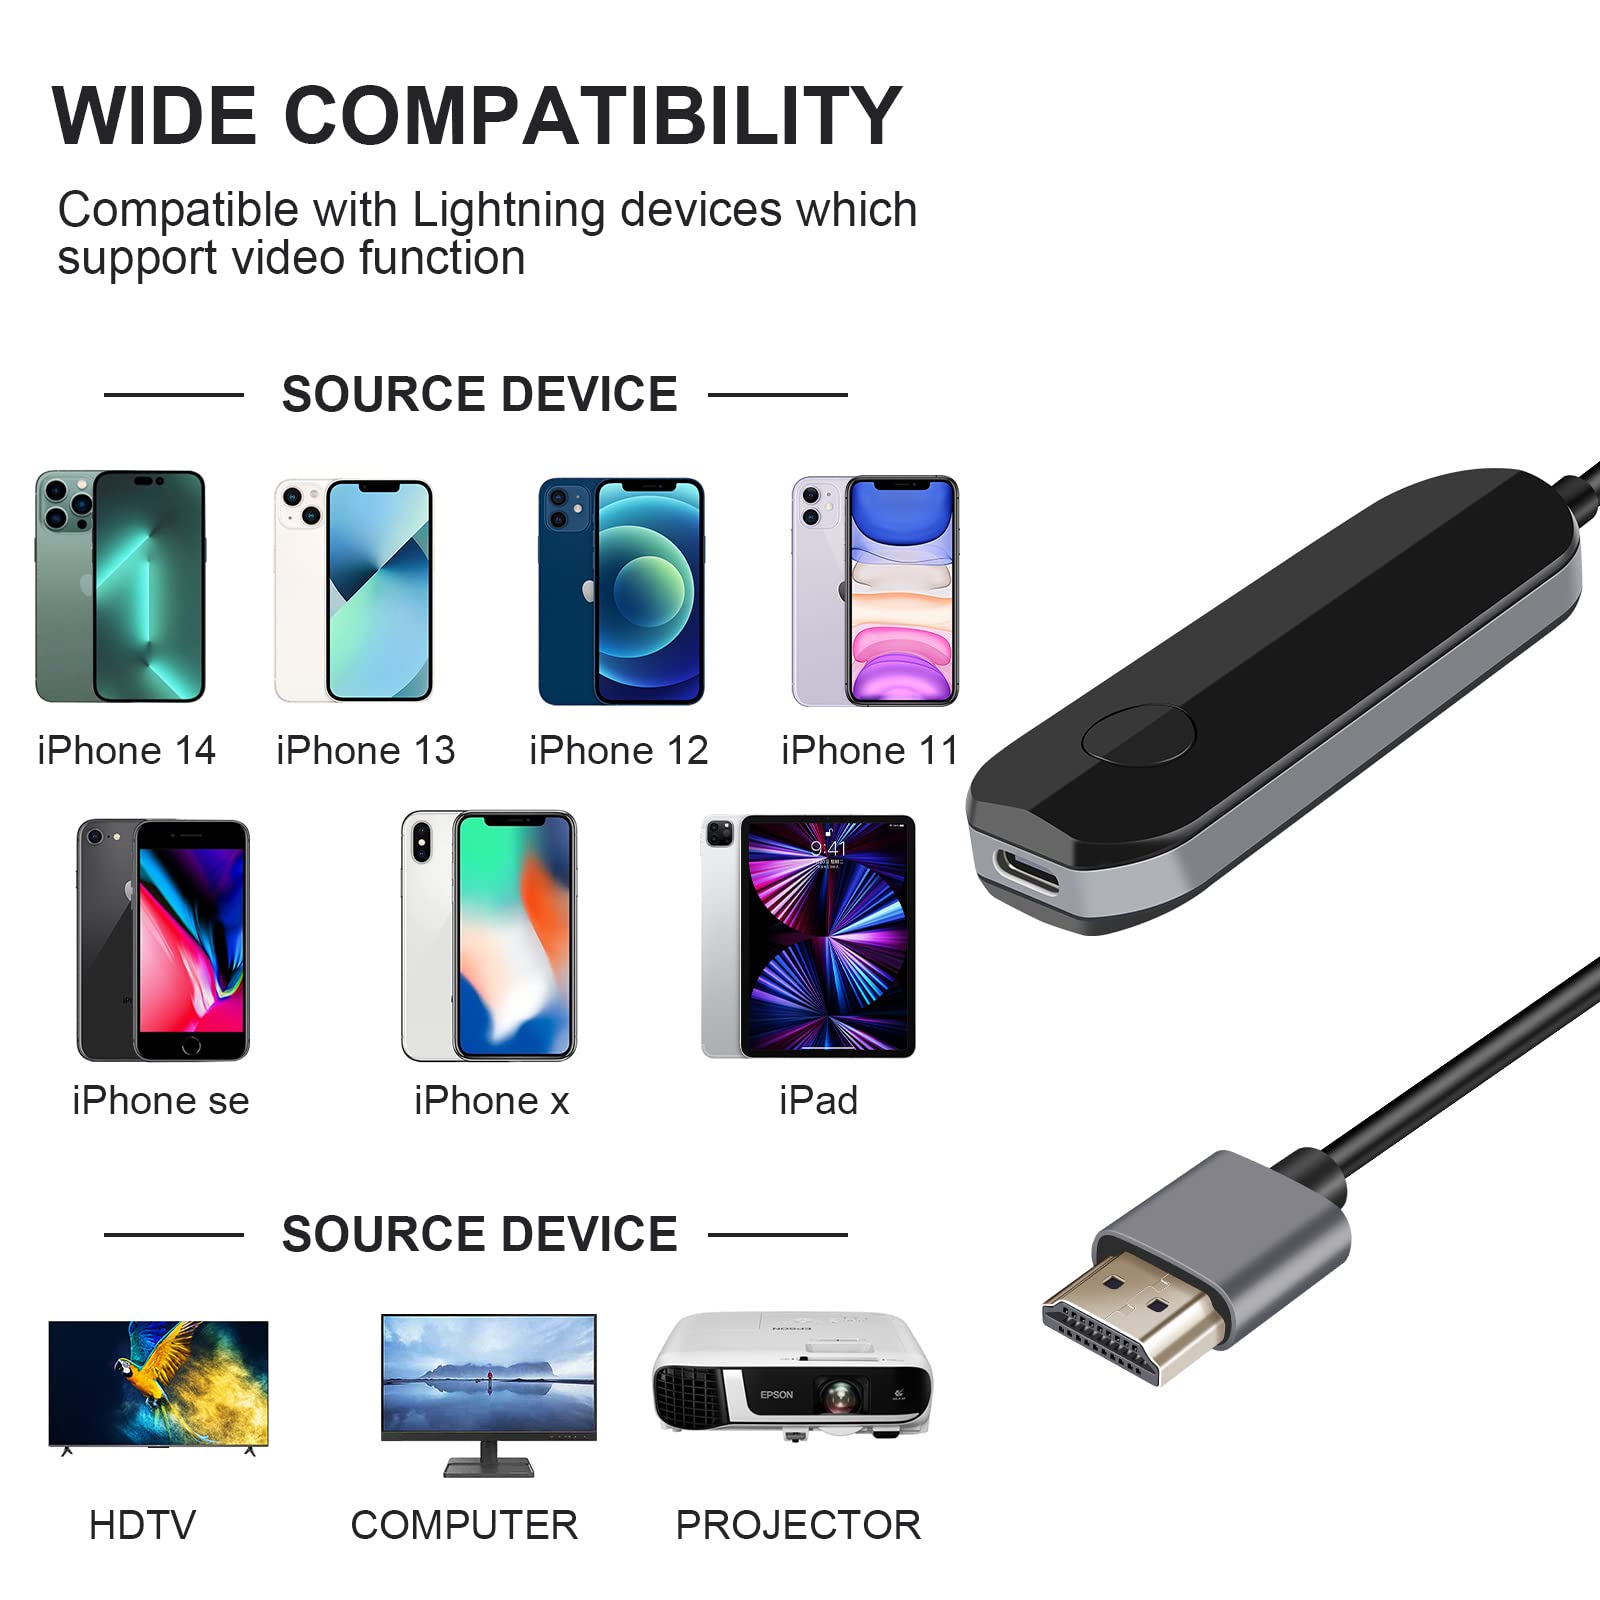 JUCONU Wireless HDMI Display Adapter,Video Mirroring Receiver,HDMI Cable Adapter Used for iPhone Mac iOS Casting/Mirroring to TV/Projector/Monitor